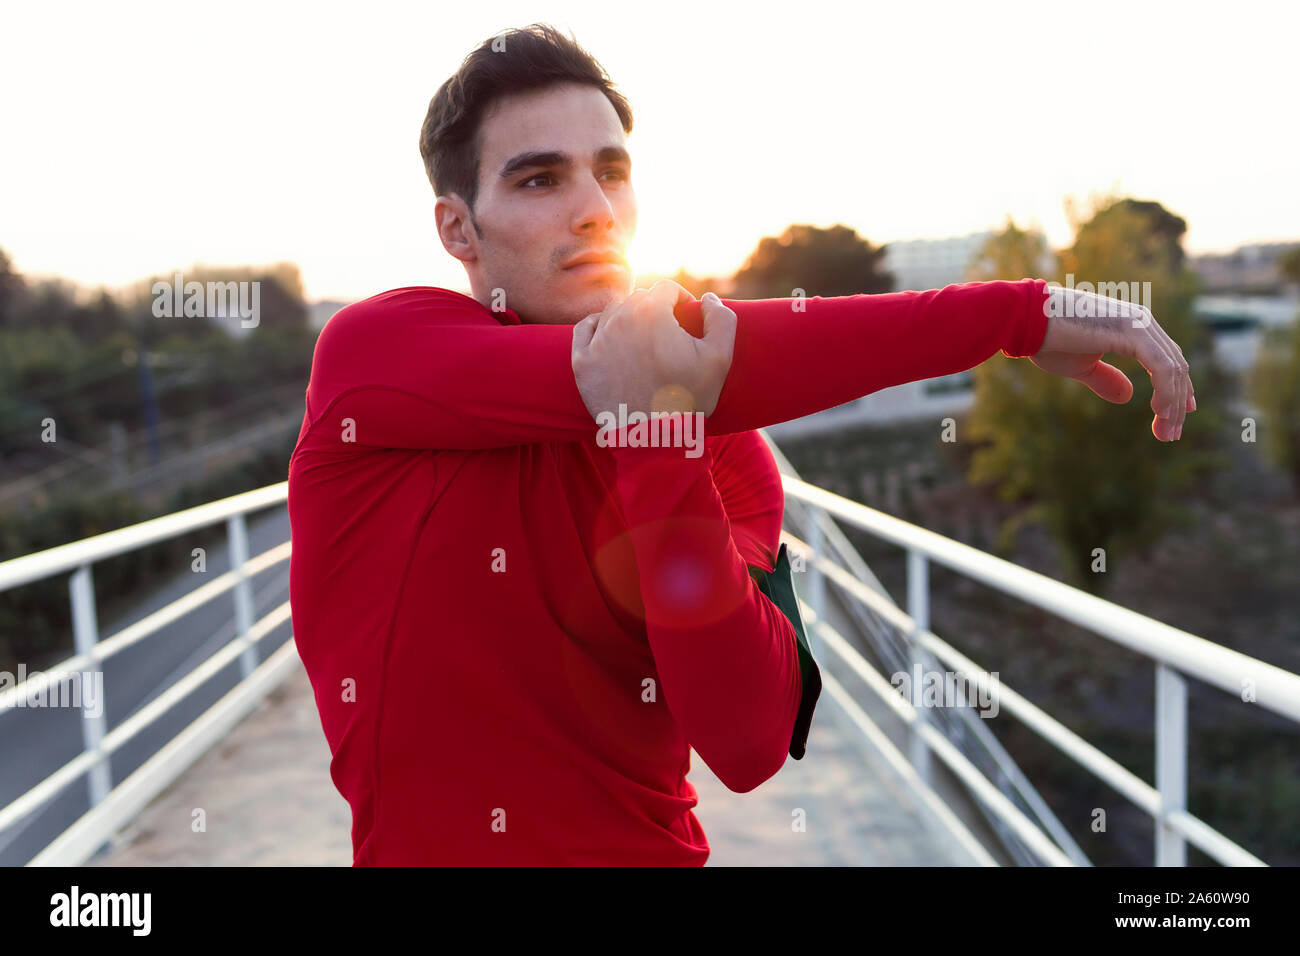 Jogger stretching his arm, against evening sun Stock Photo